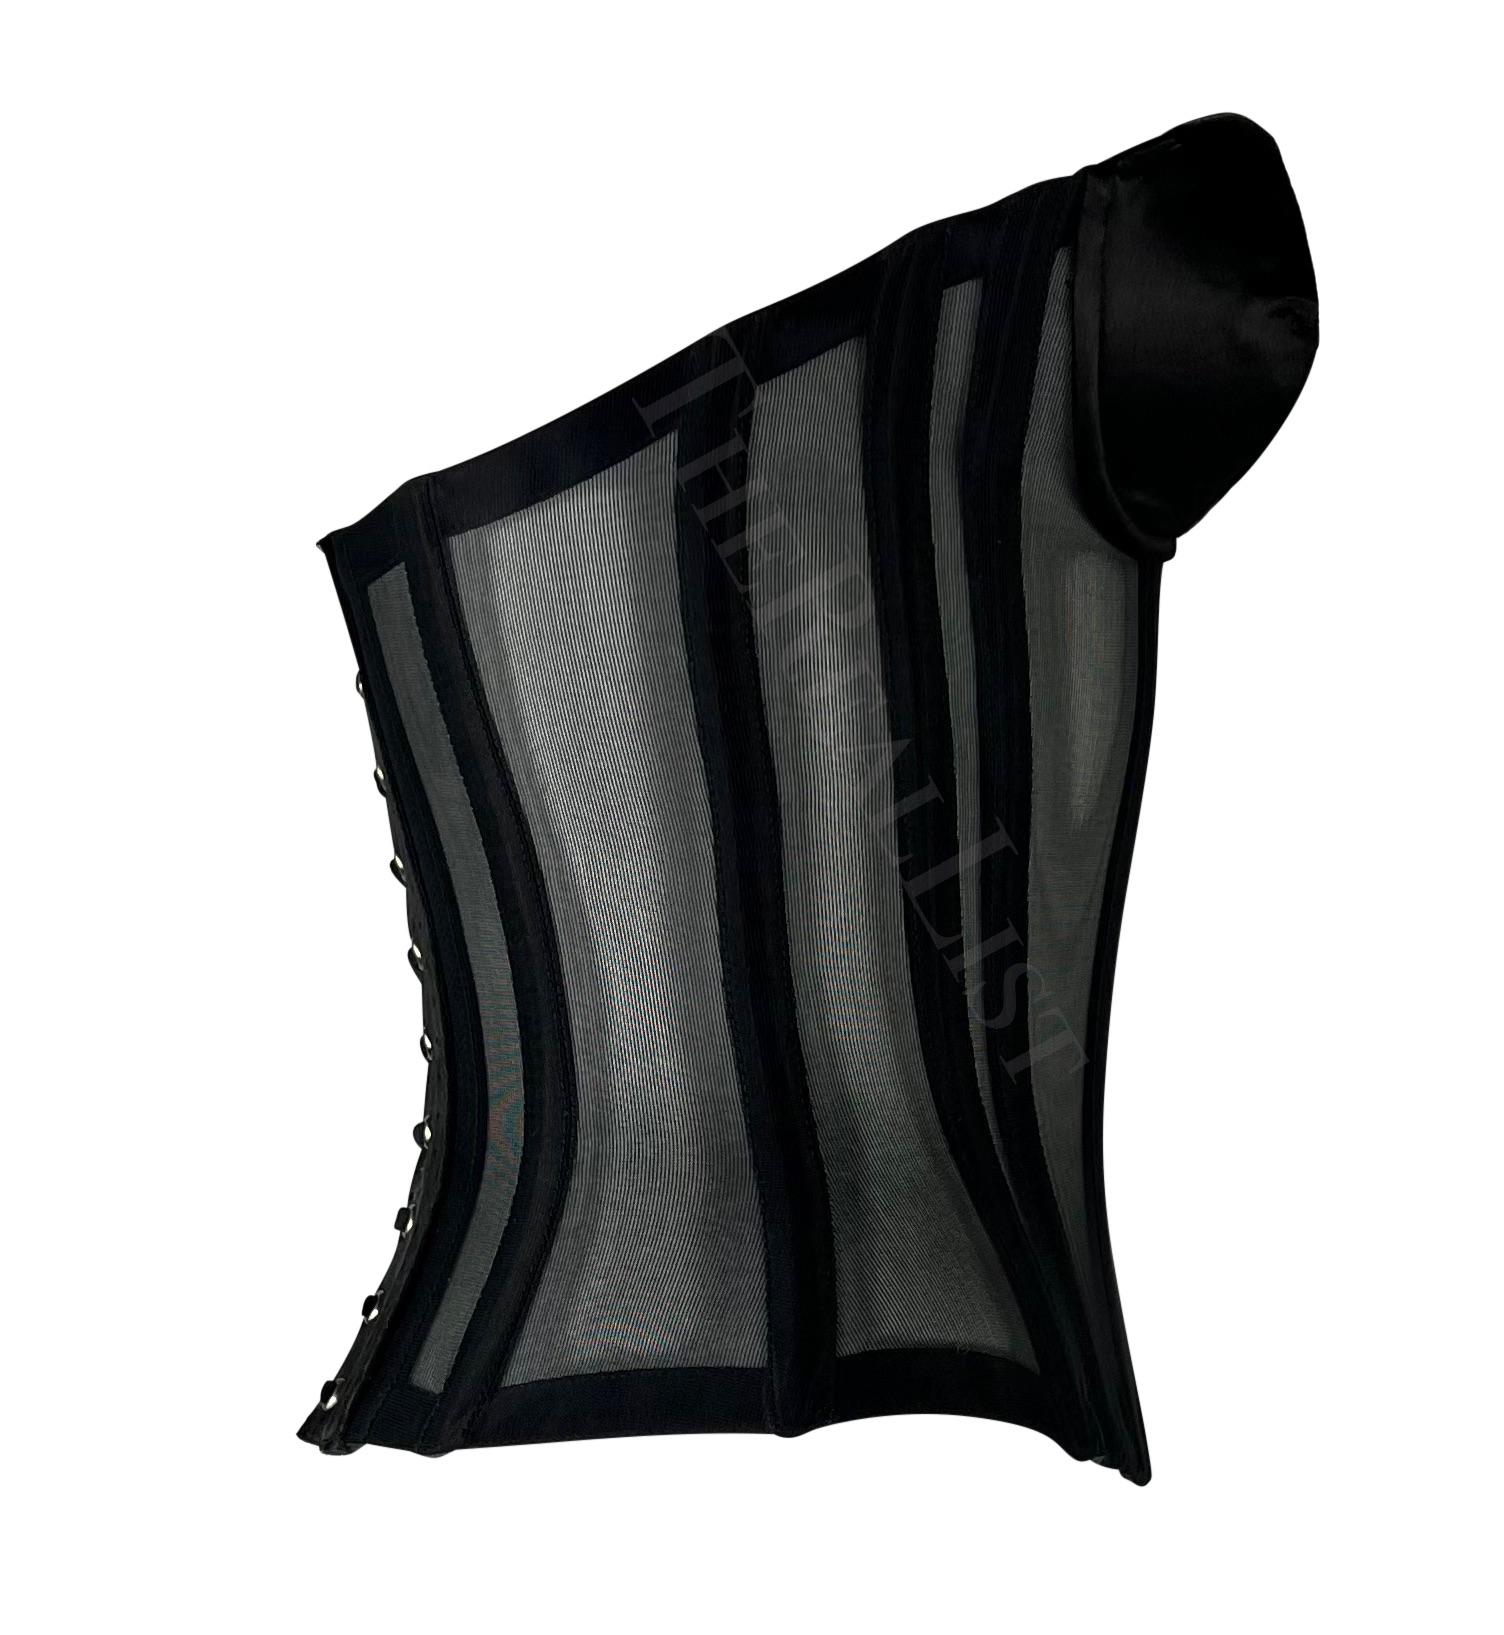 Late 1990s Thierry Mugler Lace-Up Sheer Black Satin Mr. Pearl Corset For Sale 1